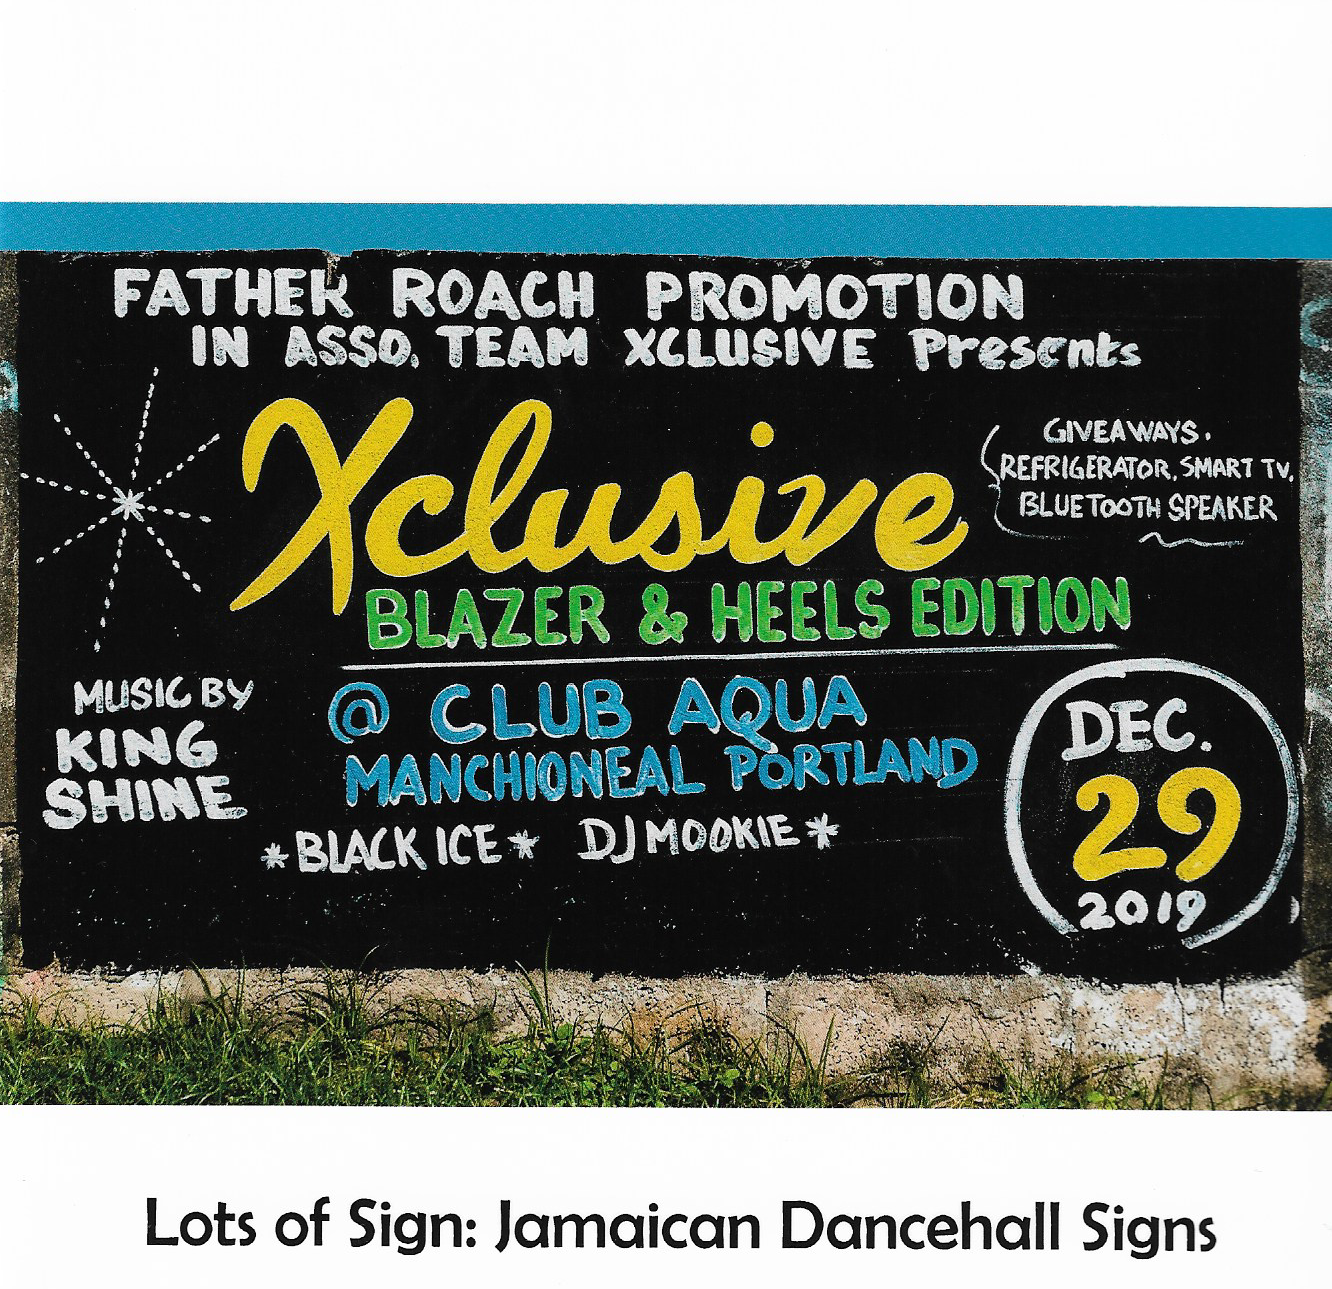 Lots of Sign: Jamaican Dancehall Signs